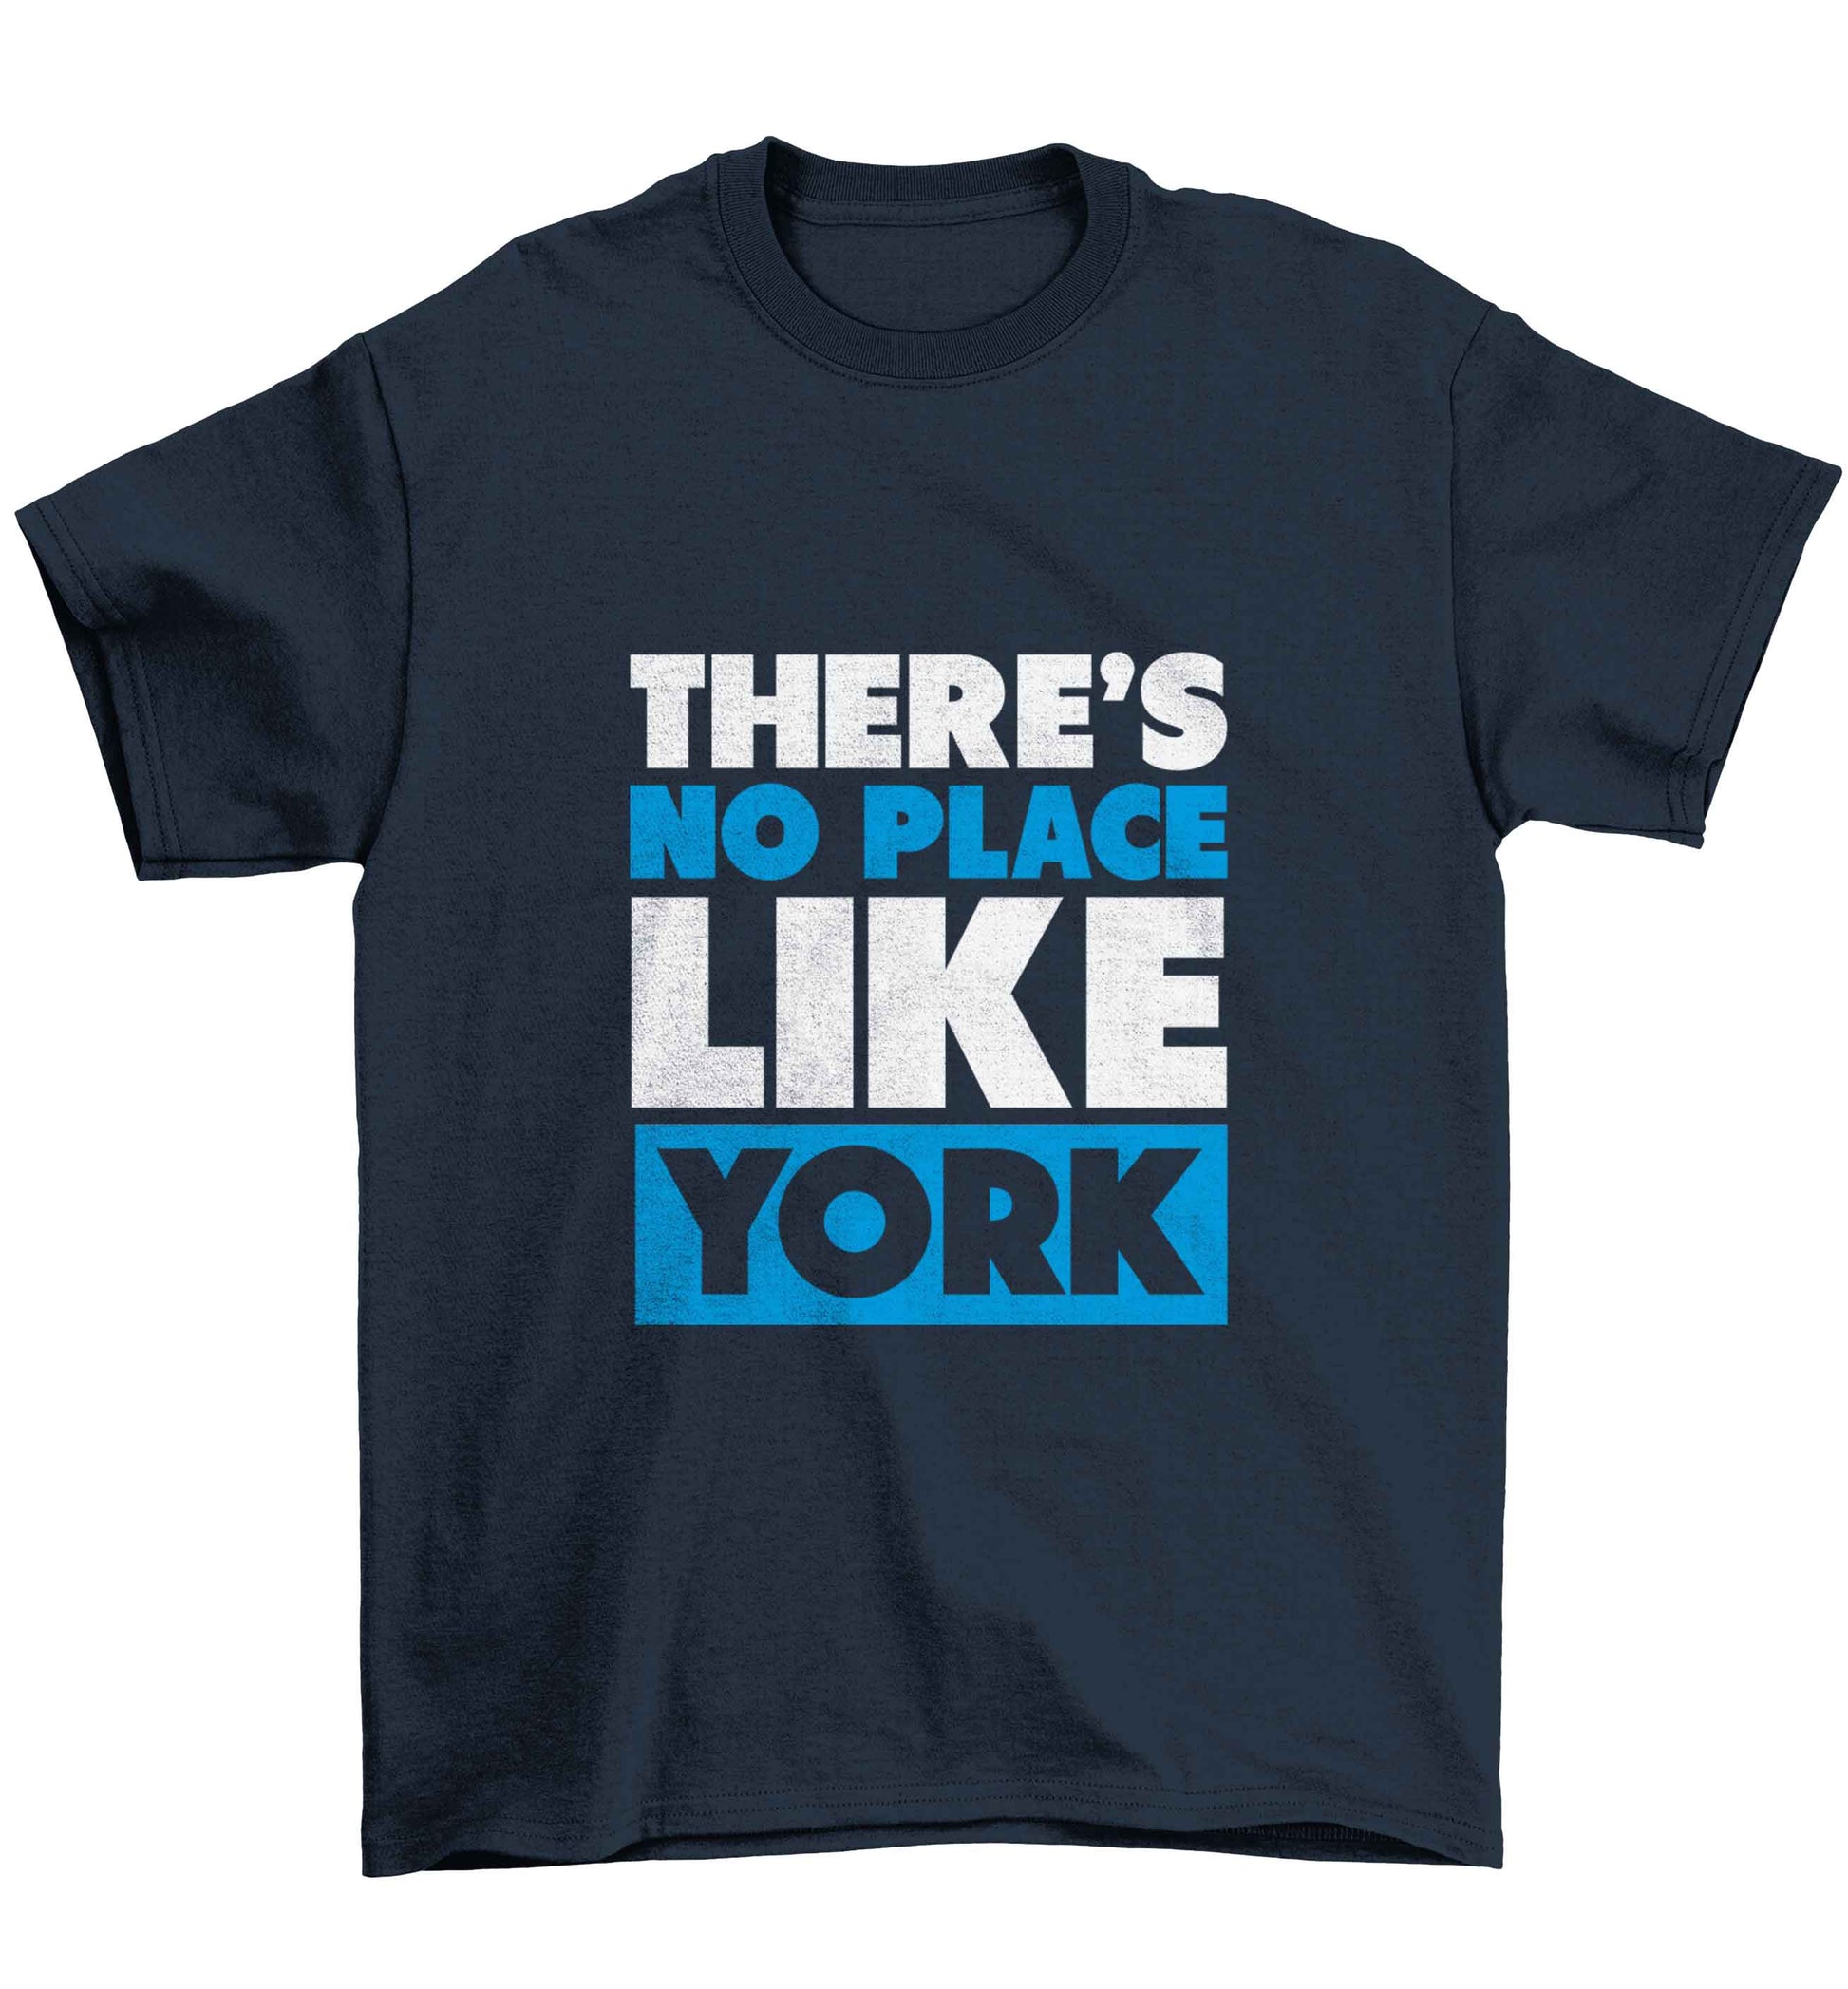 There's no place like york Children's navy Tshirt 12-13 Years